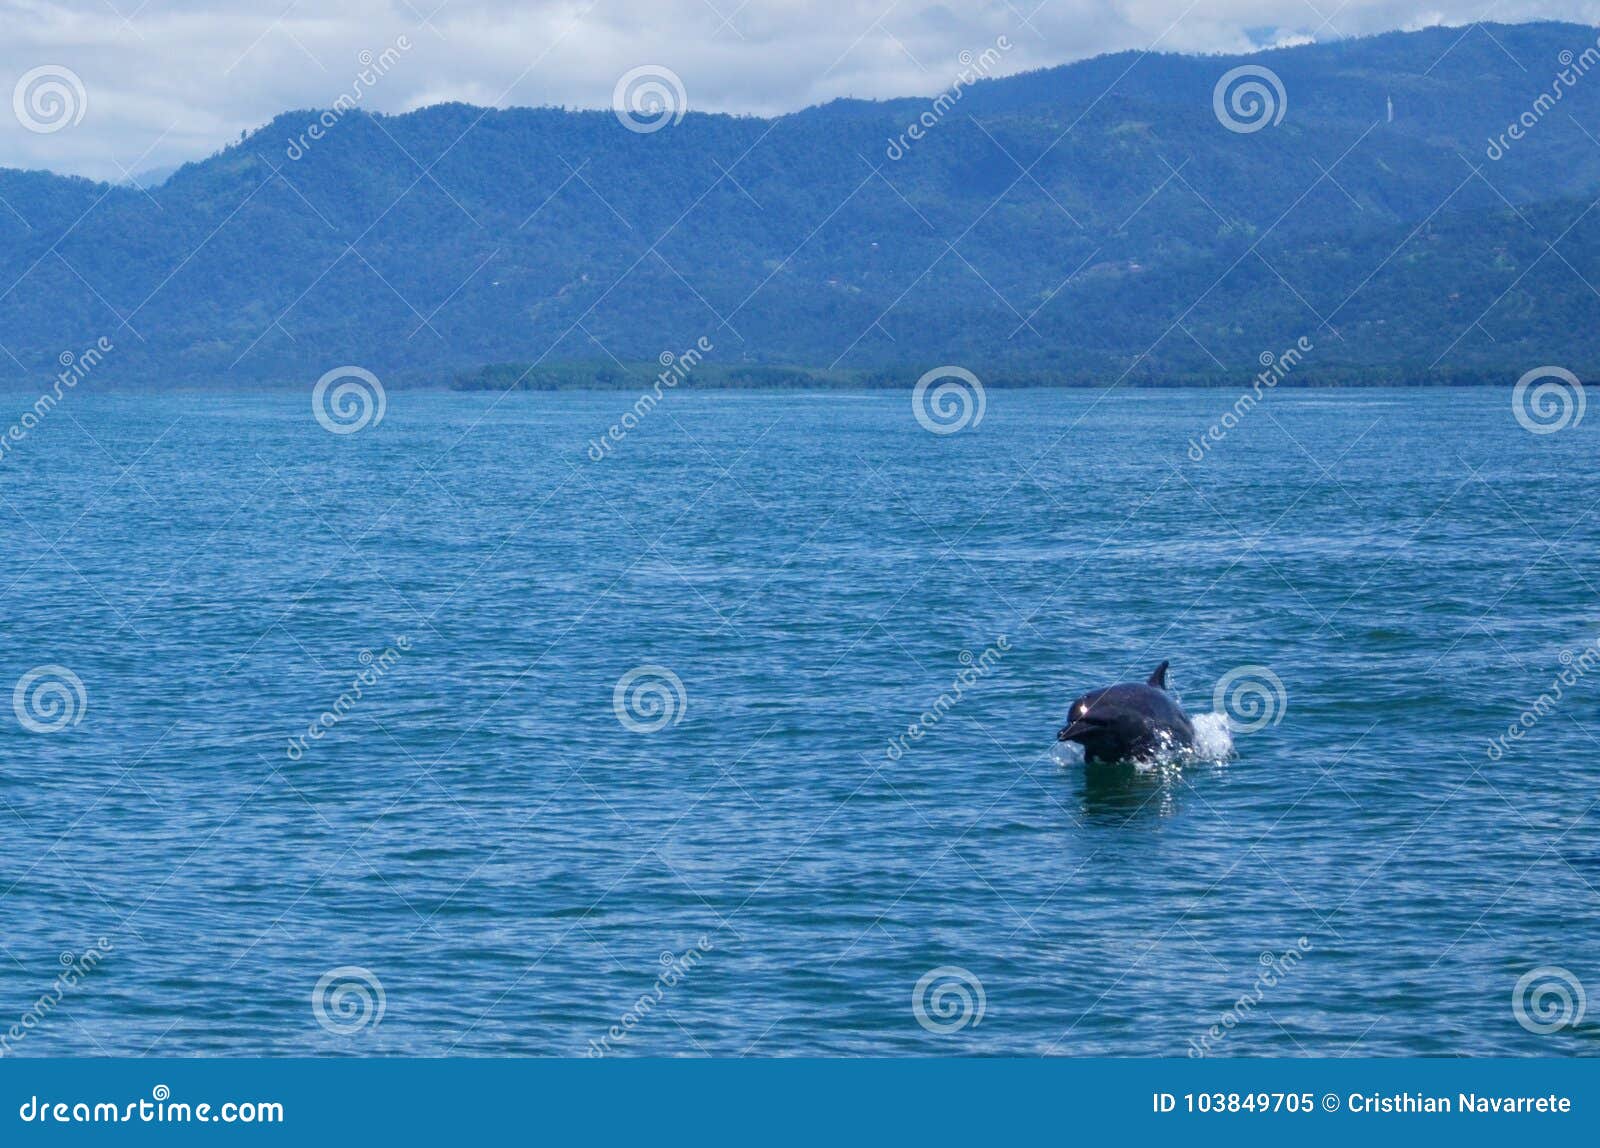 the dolphin in the sea